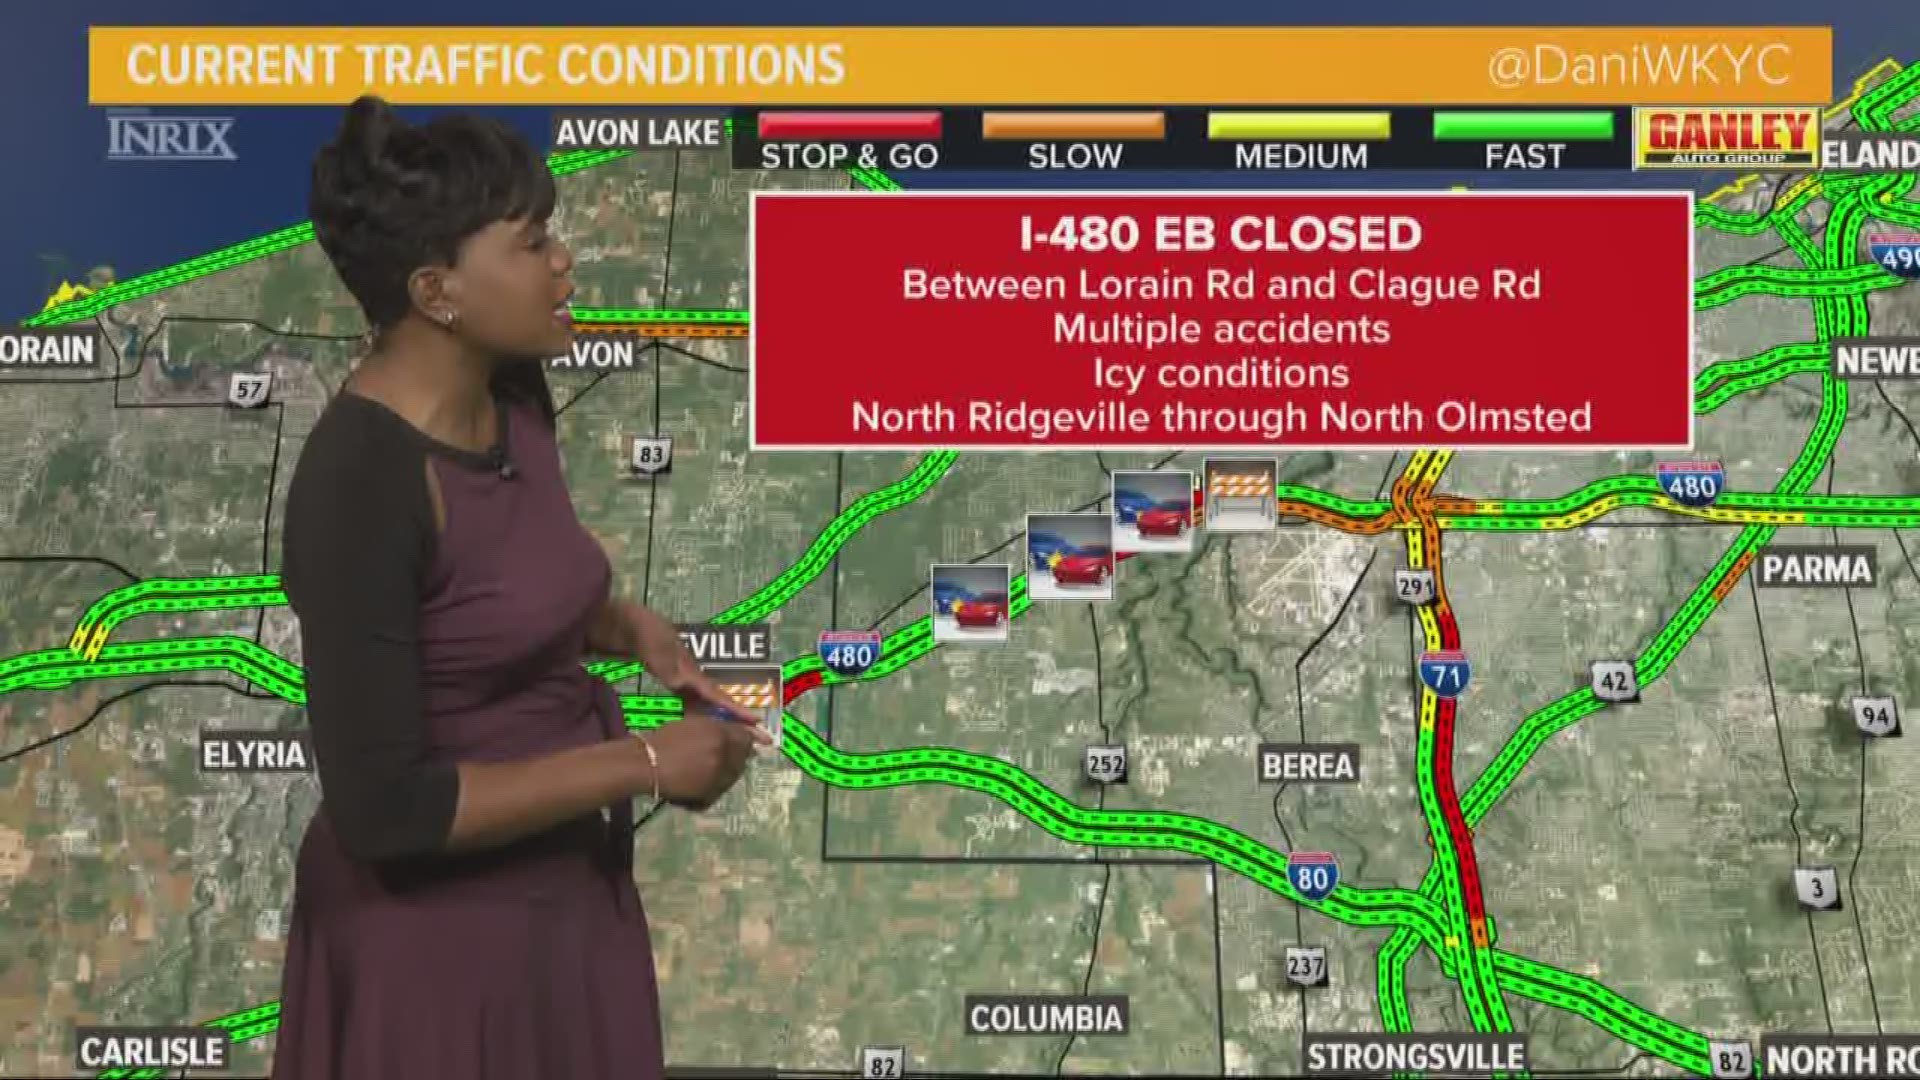 April 5, 2018: I-480 East is closed between North Ridgeville and North Olmsted until further notice, authorities say, because there are multiple crashes throughout that stretch near Lorain Road. Authorities say as many as six crashes are reported.